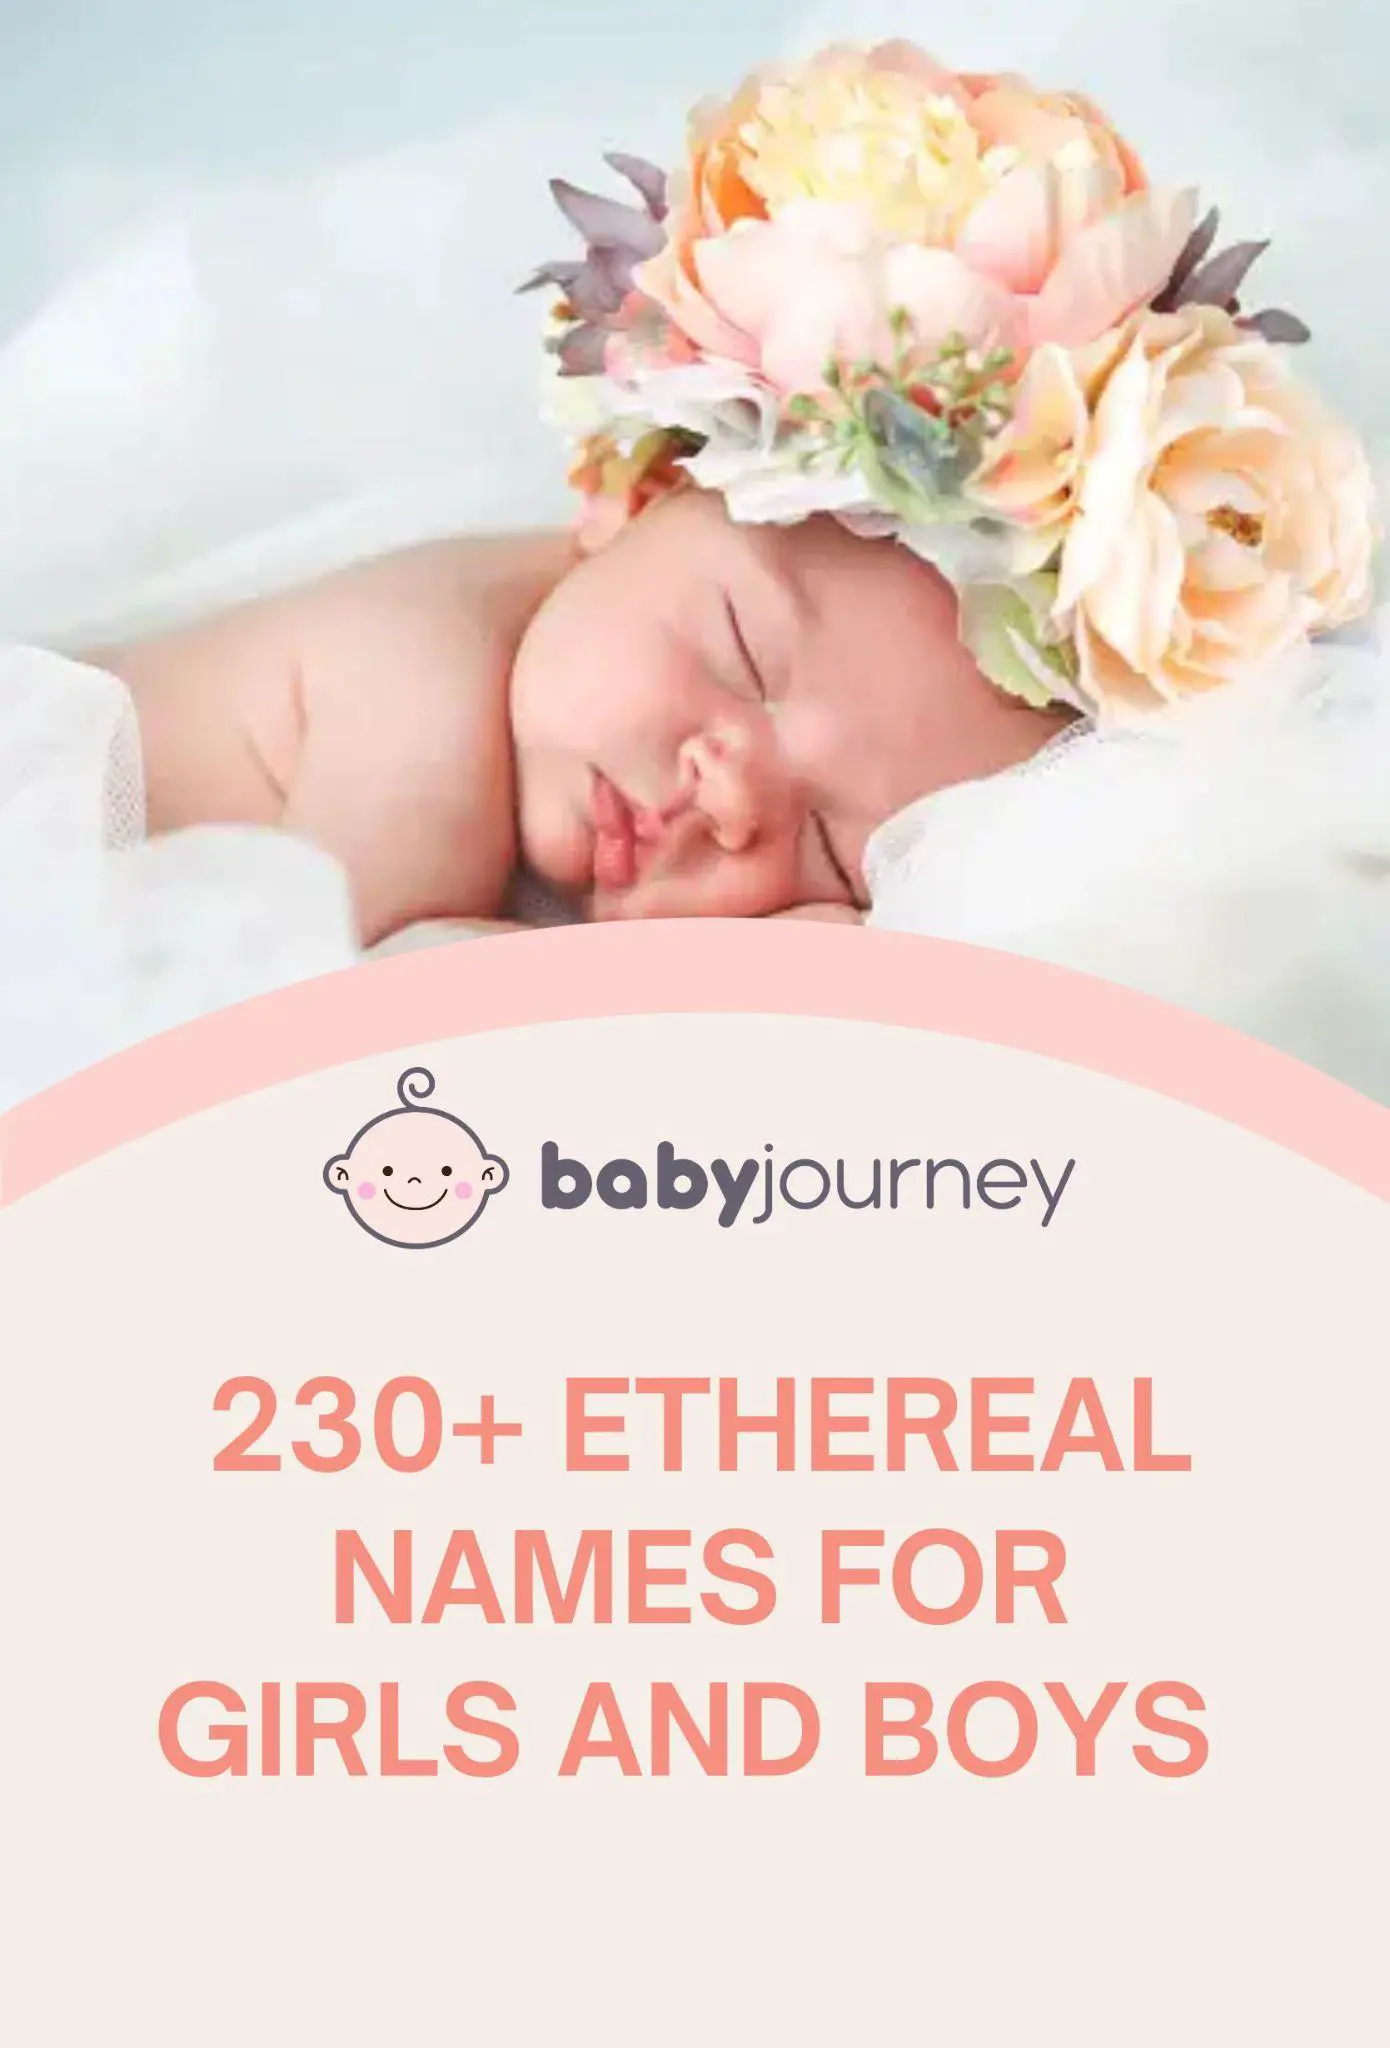 230+ Ethereal Names for Girls and Boys  pinterest - Baby Journey